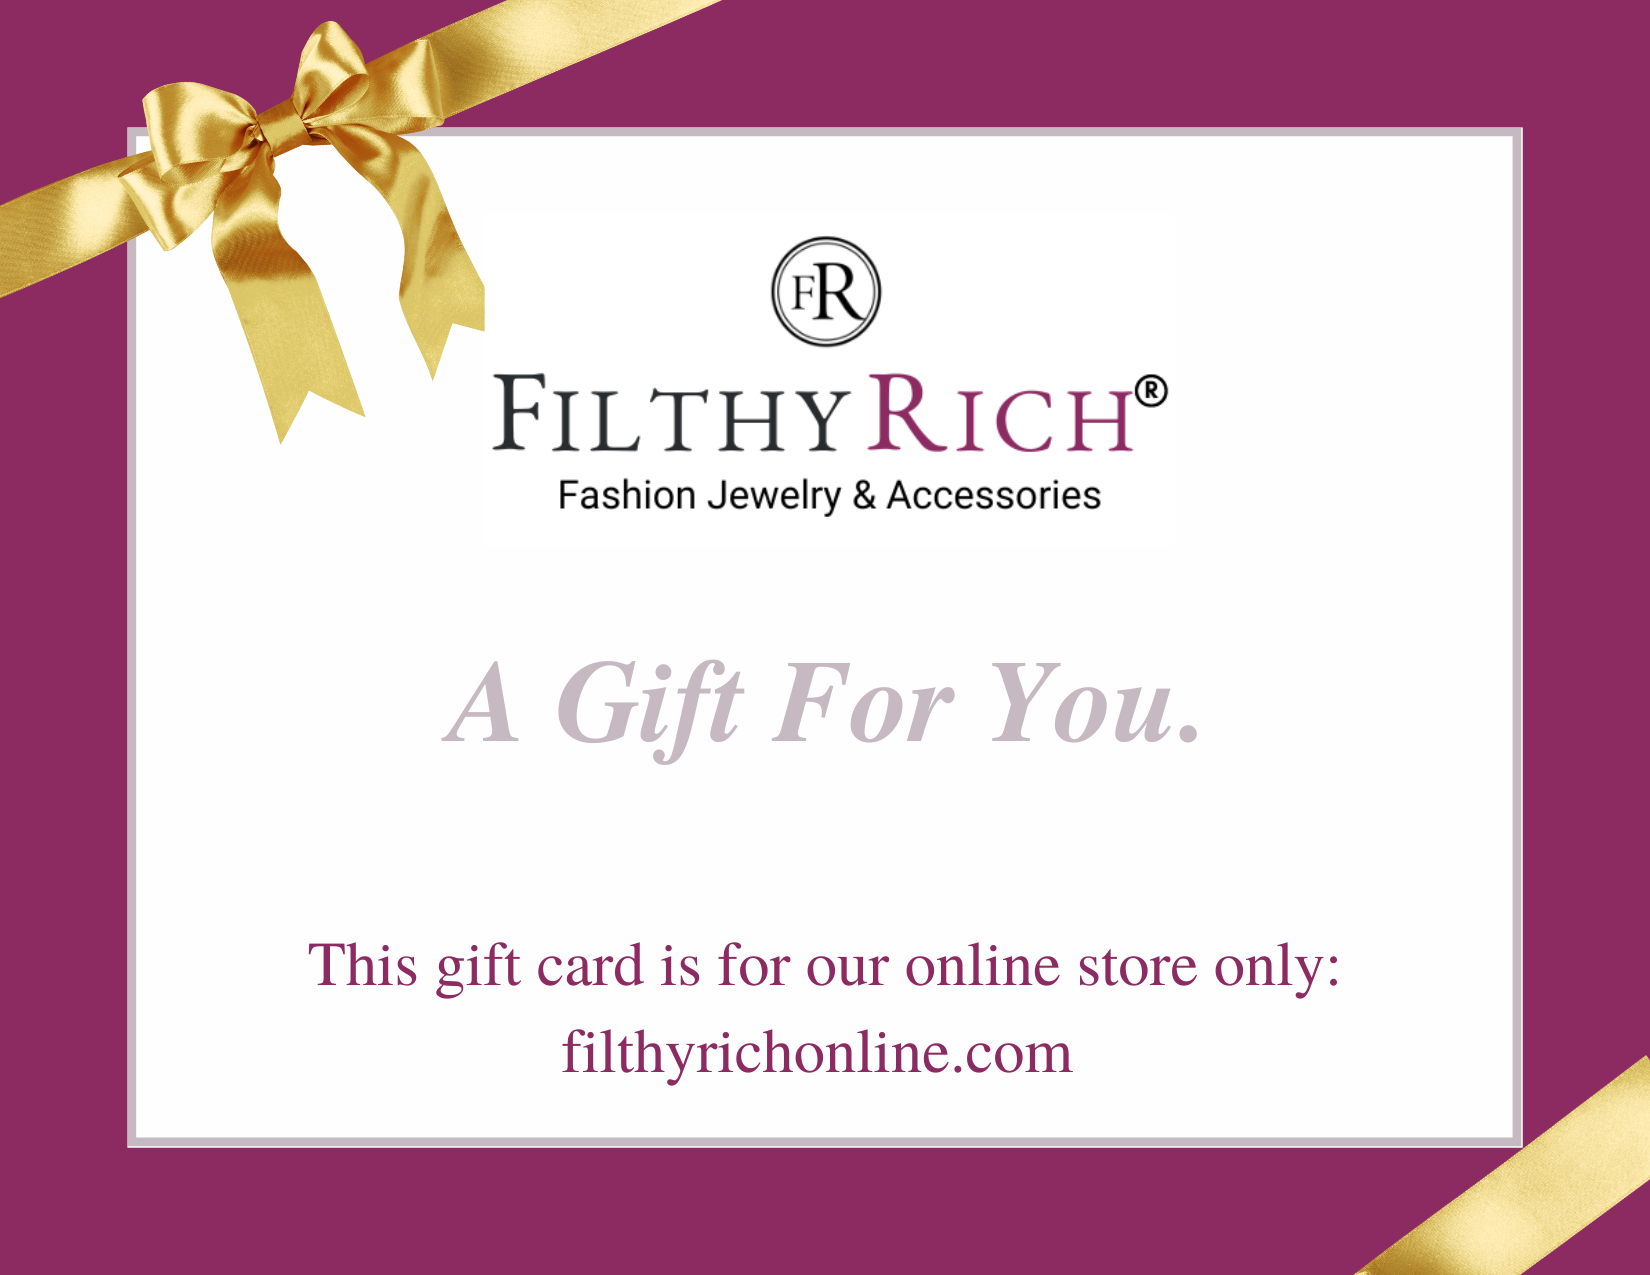 Filthy Rich Online Store Gift Card